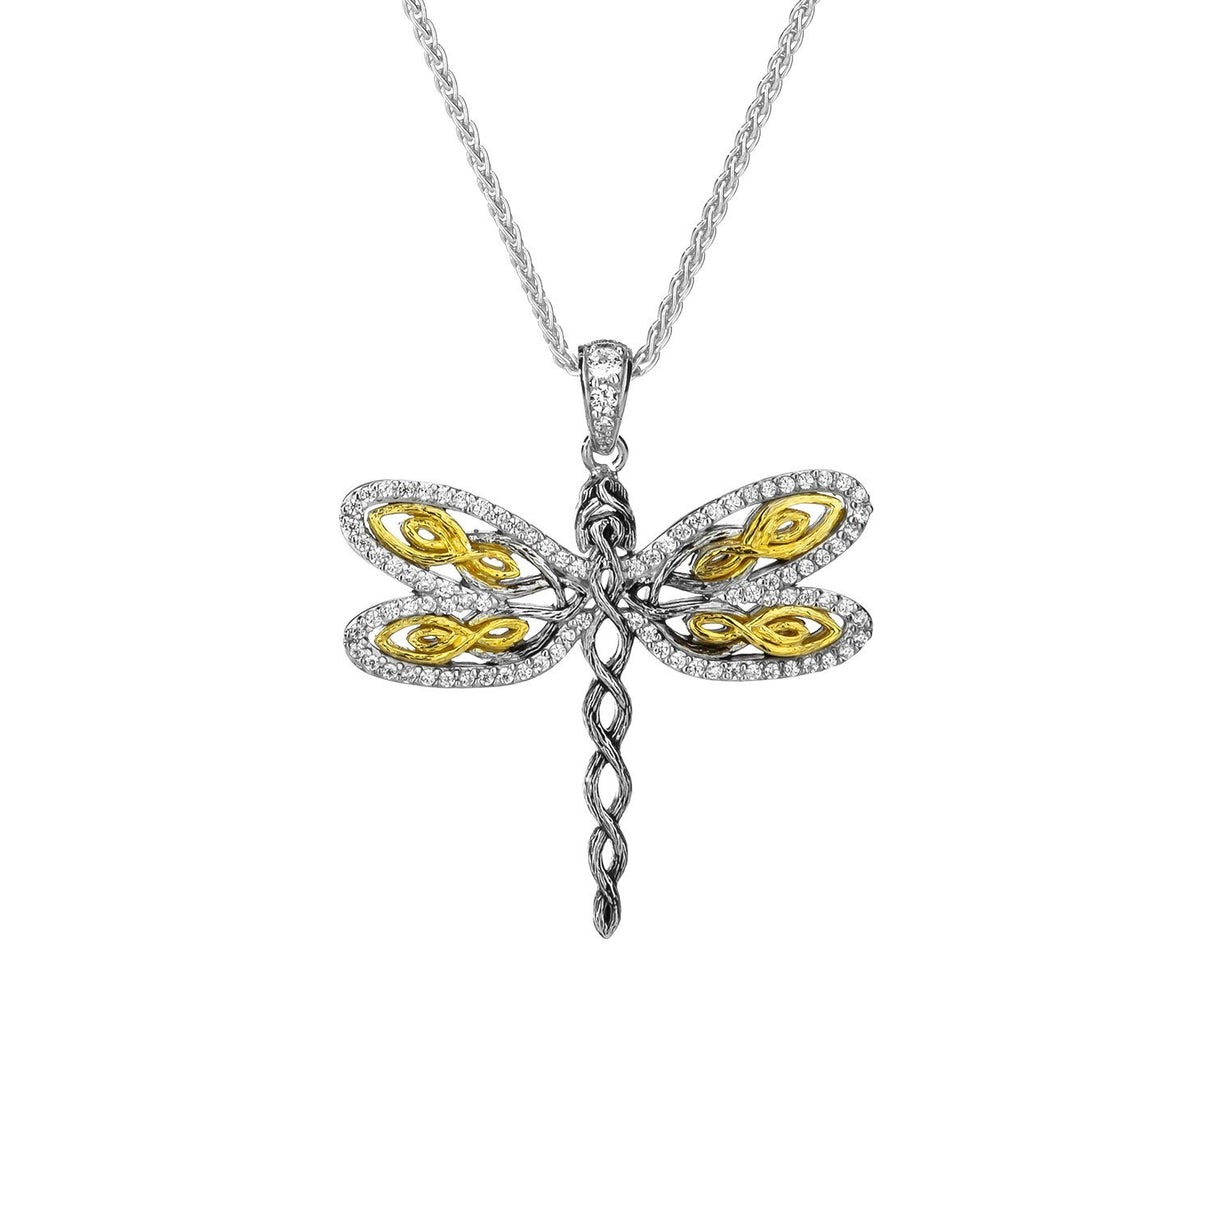 Dragonfly Pendant - Sterling Silver / Dark Rhodium and 10k Gold and White Cubic Zirconia